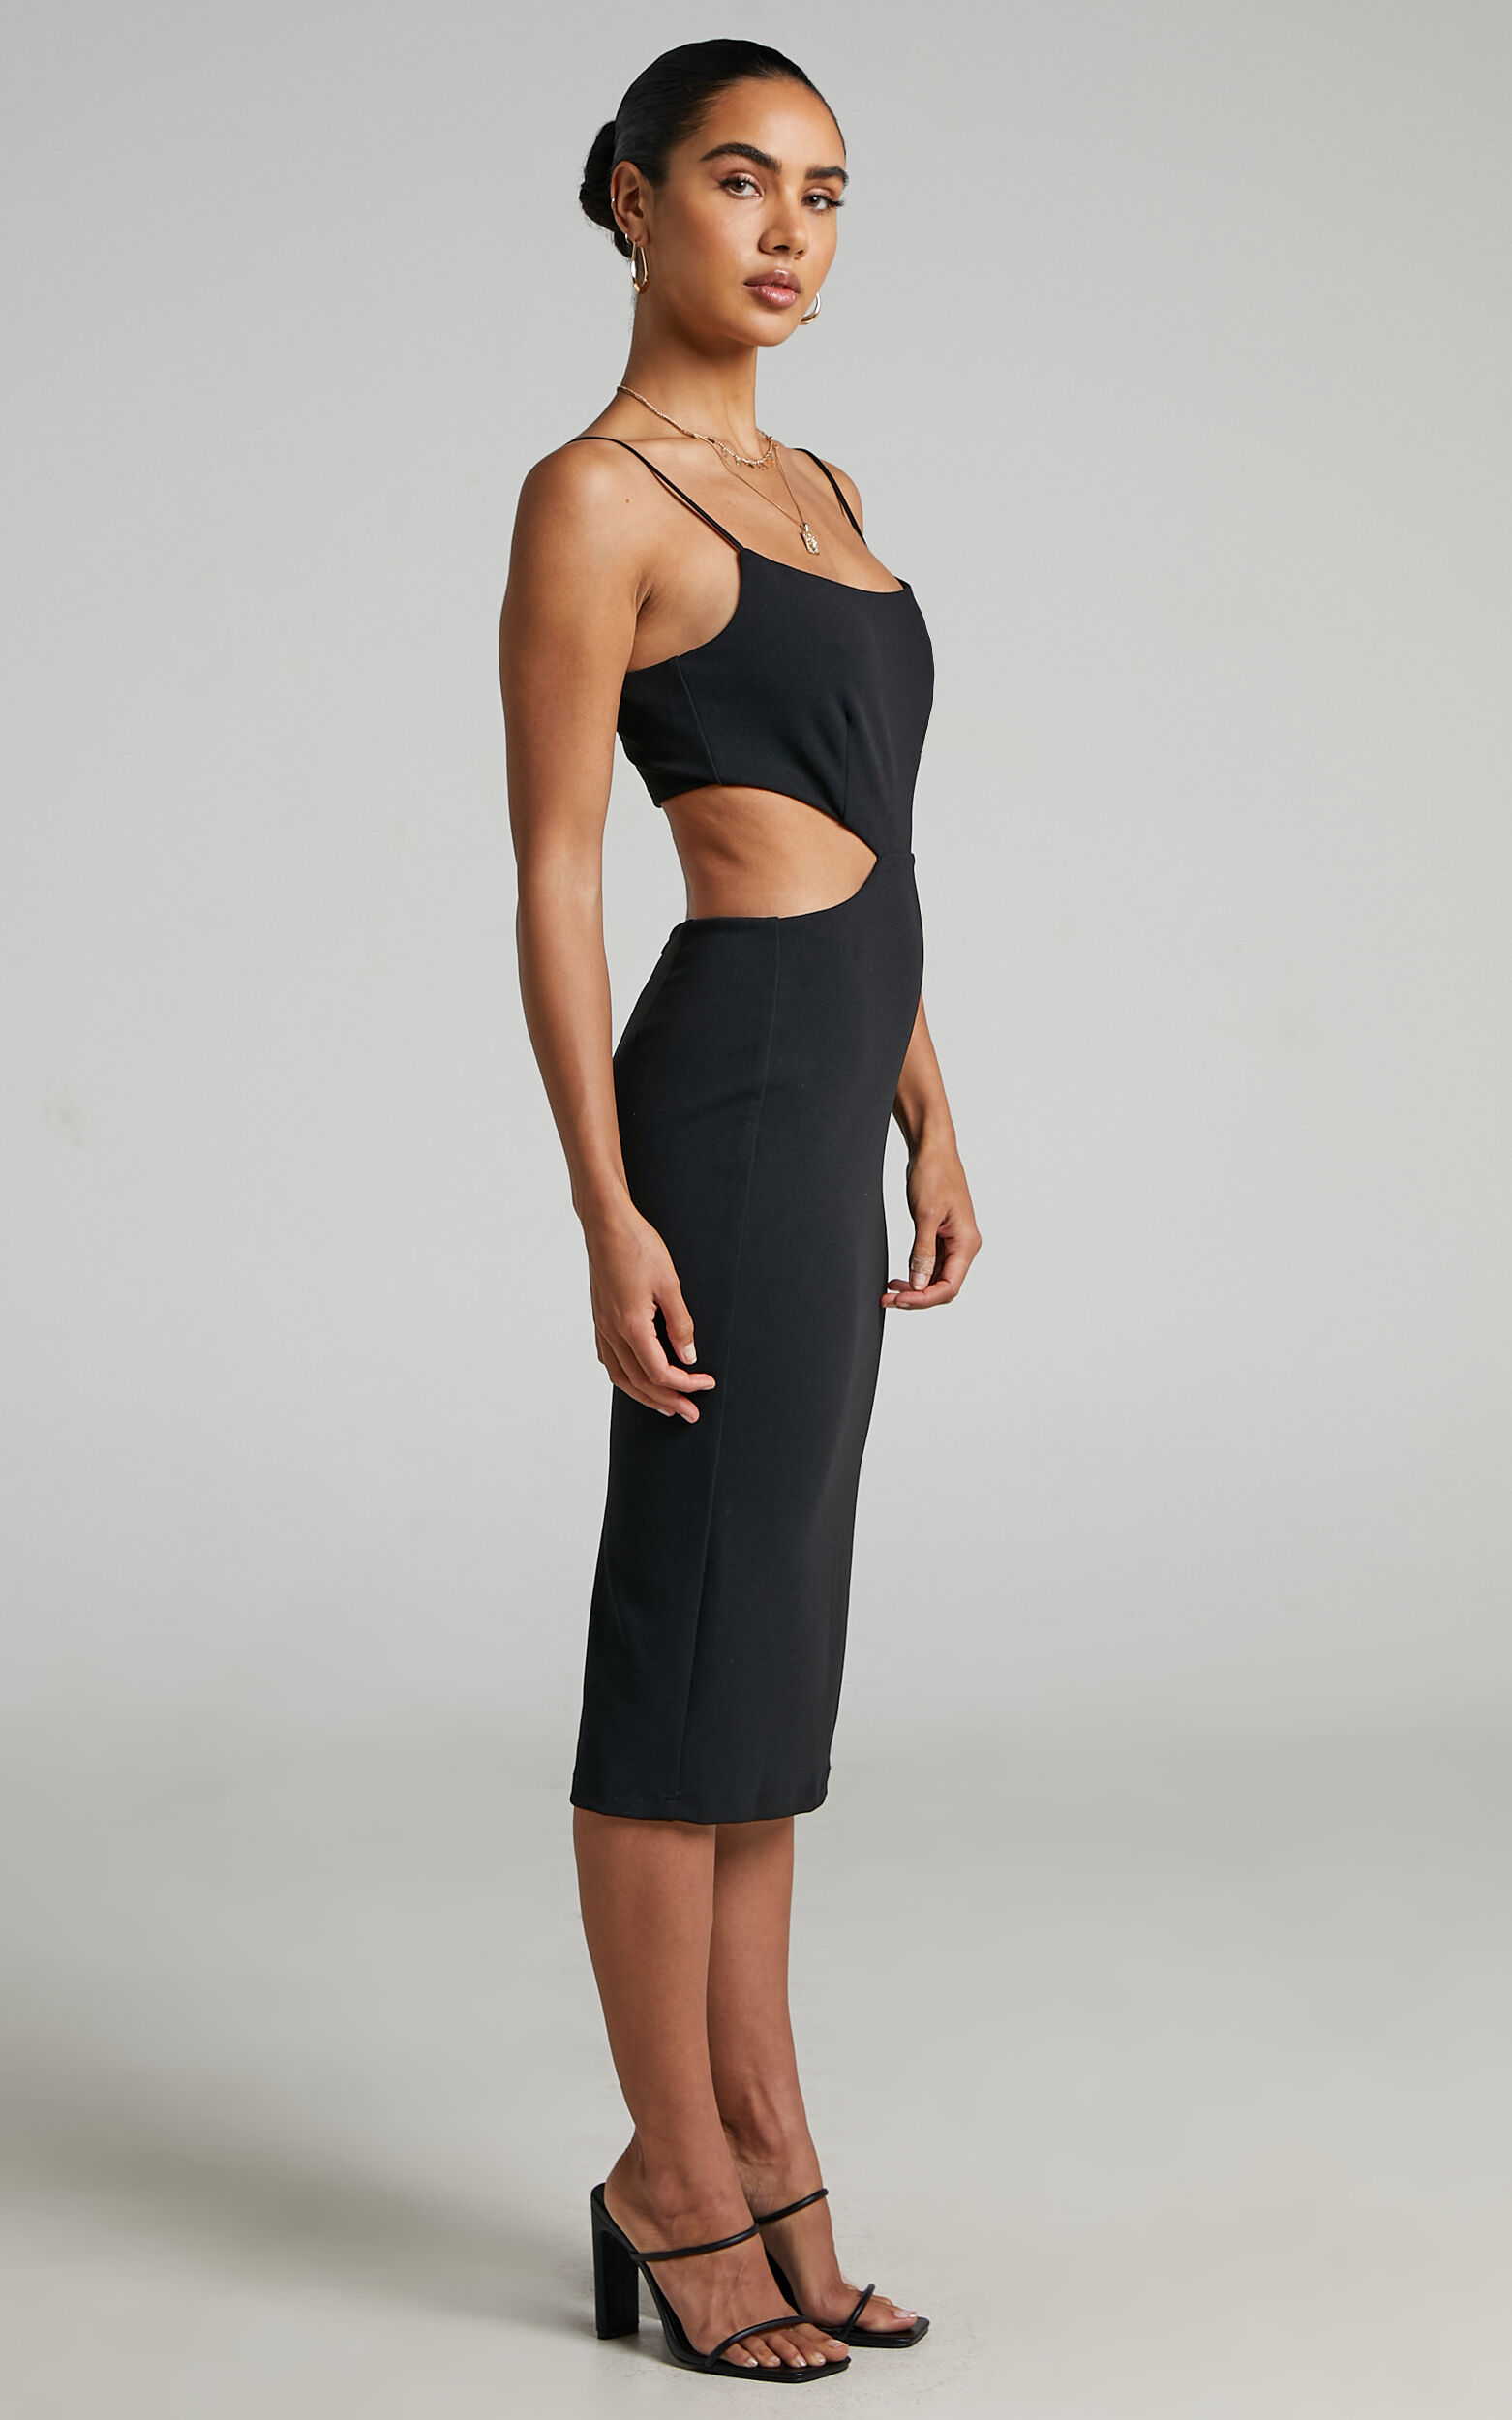 Honalei Cut out midi dress in Black - 04, BLK1, super-hi-res image number null